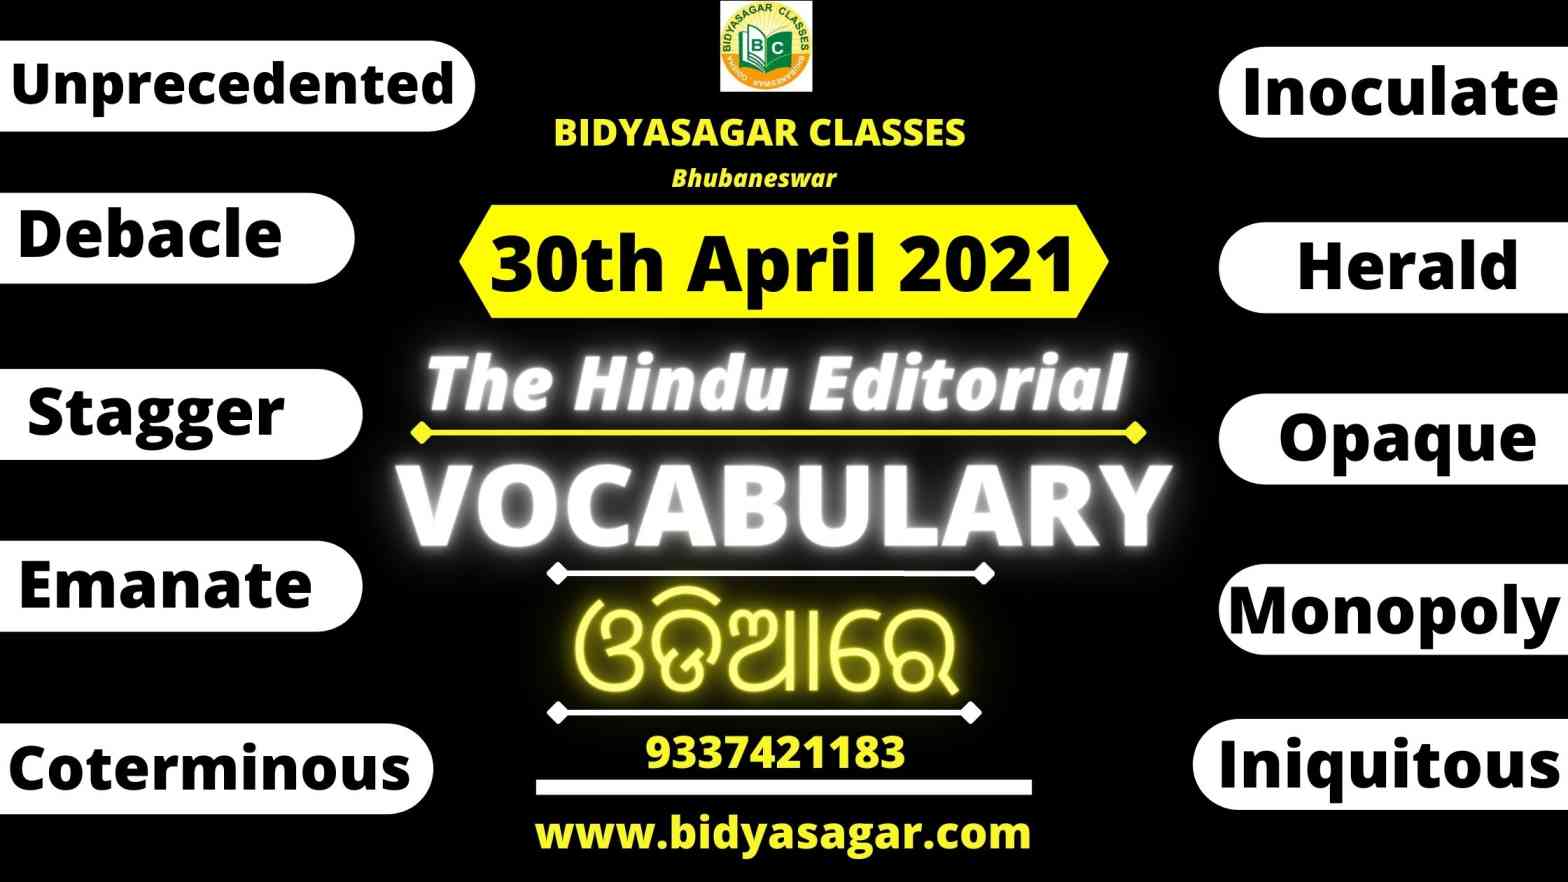 The Hindu Editorial Vocabulary of 30th April 2021